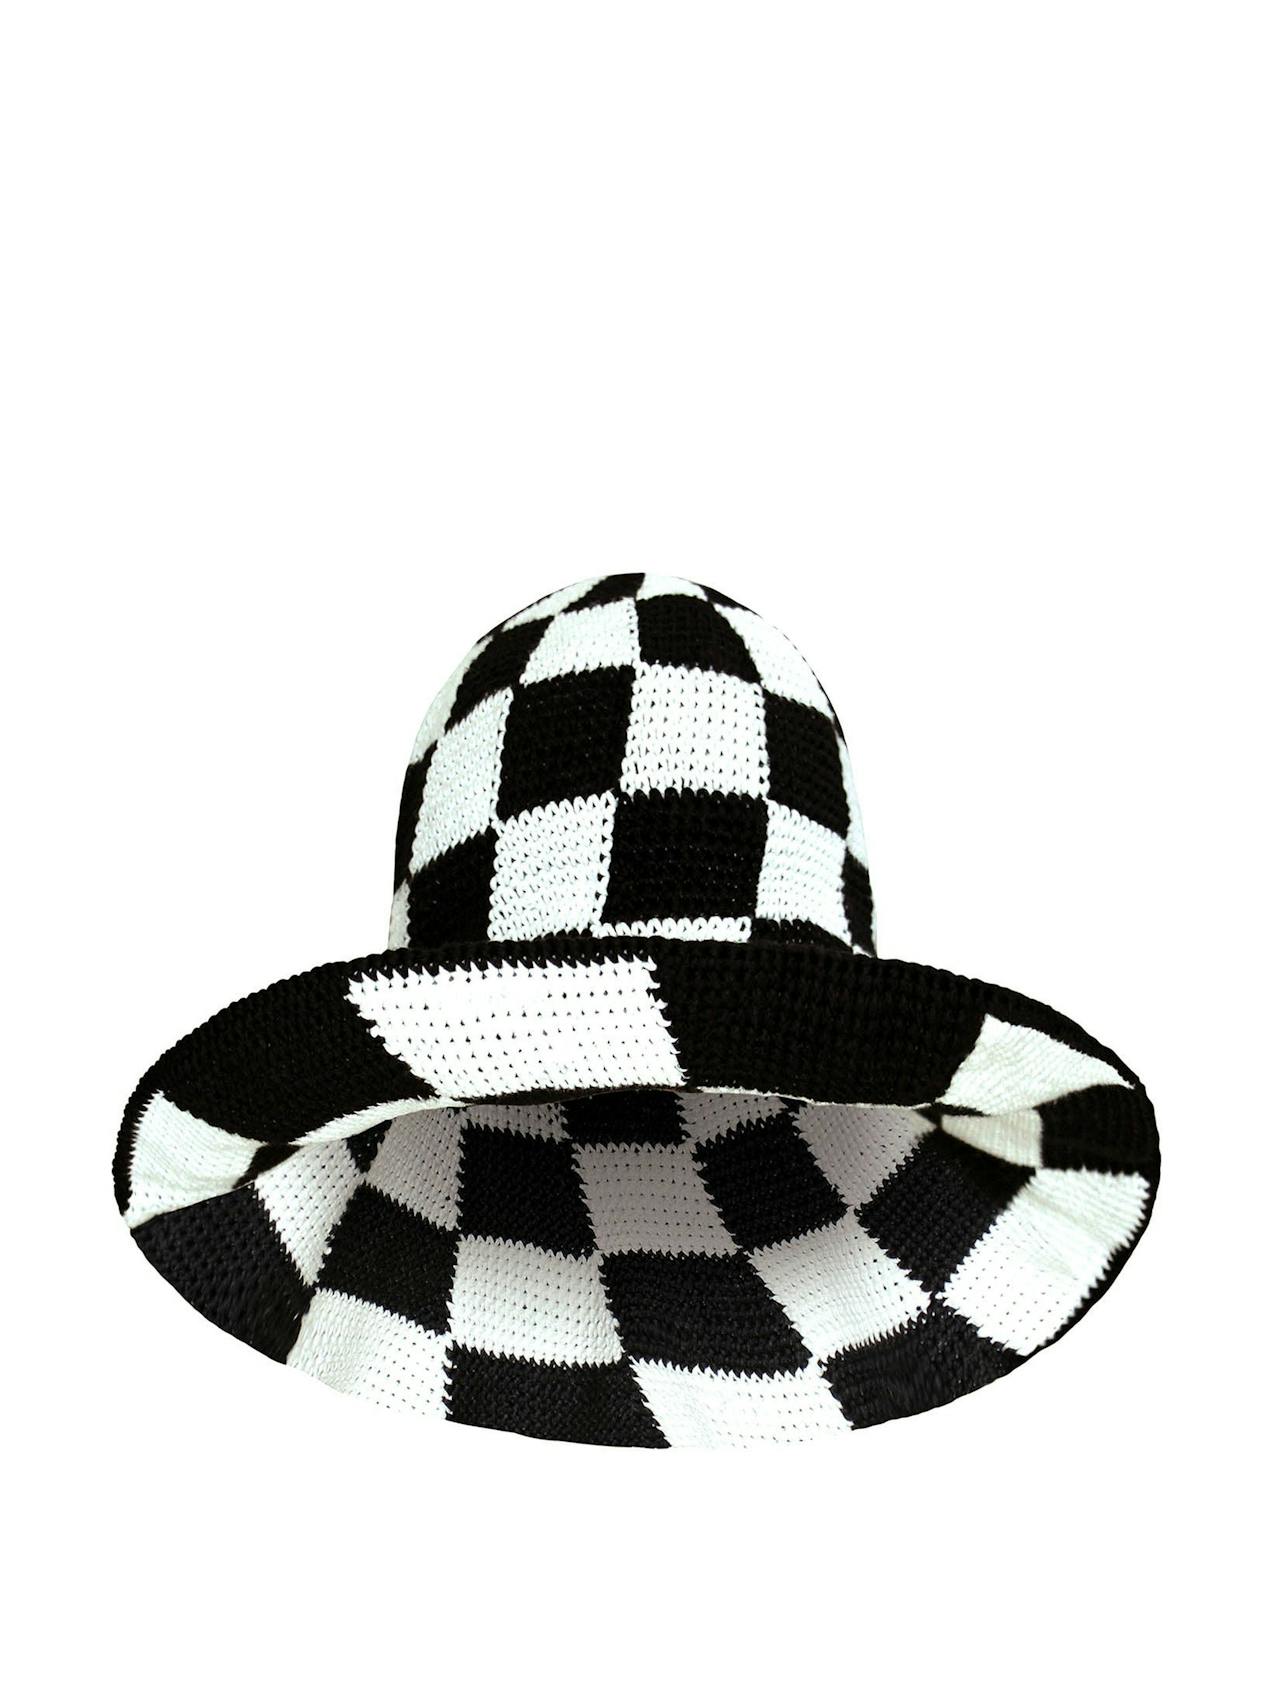 Silo checkered crochet hat in black and white